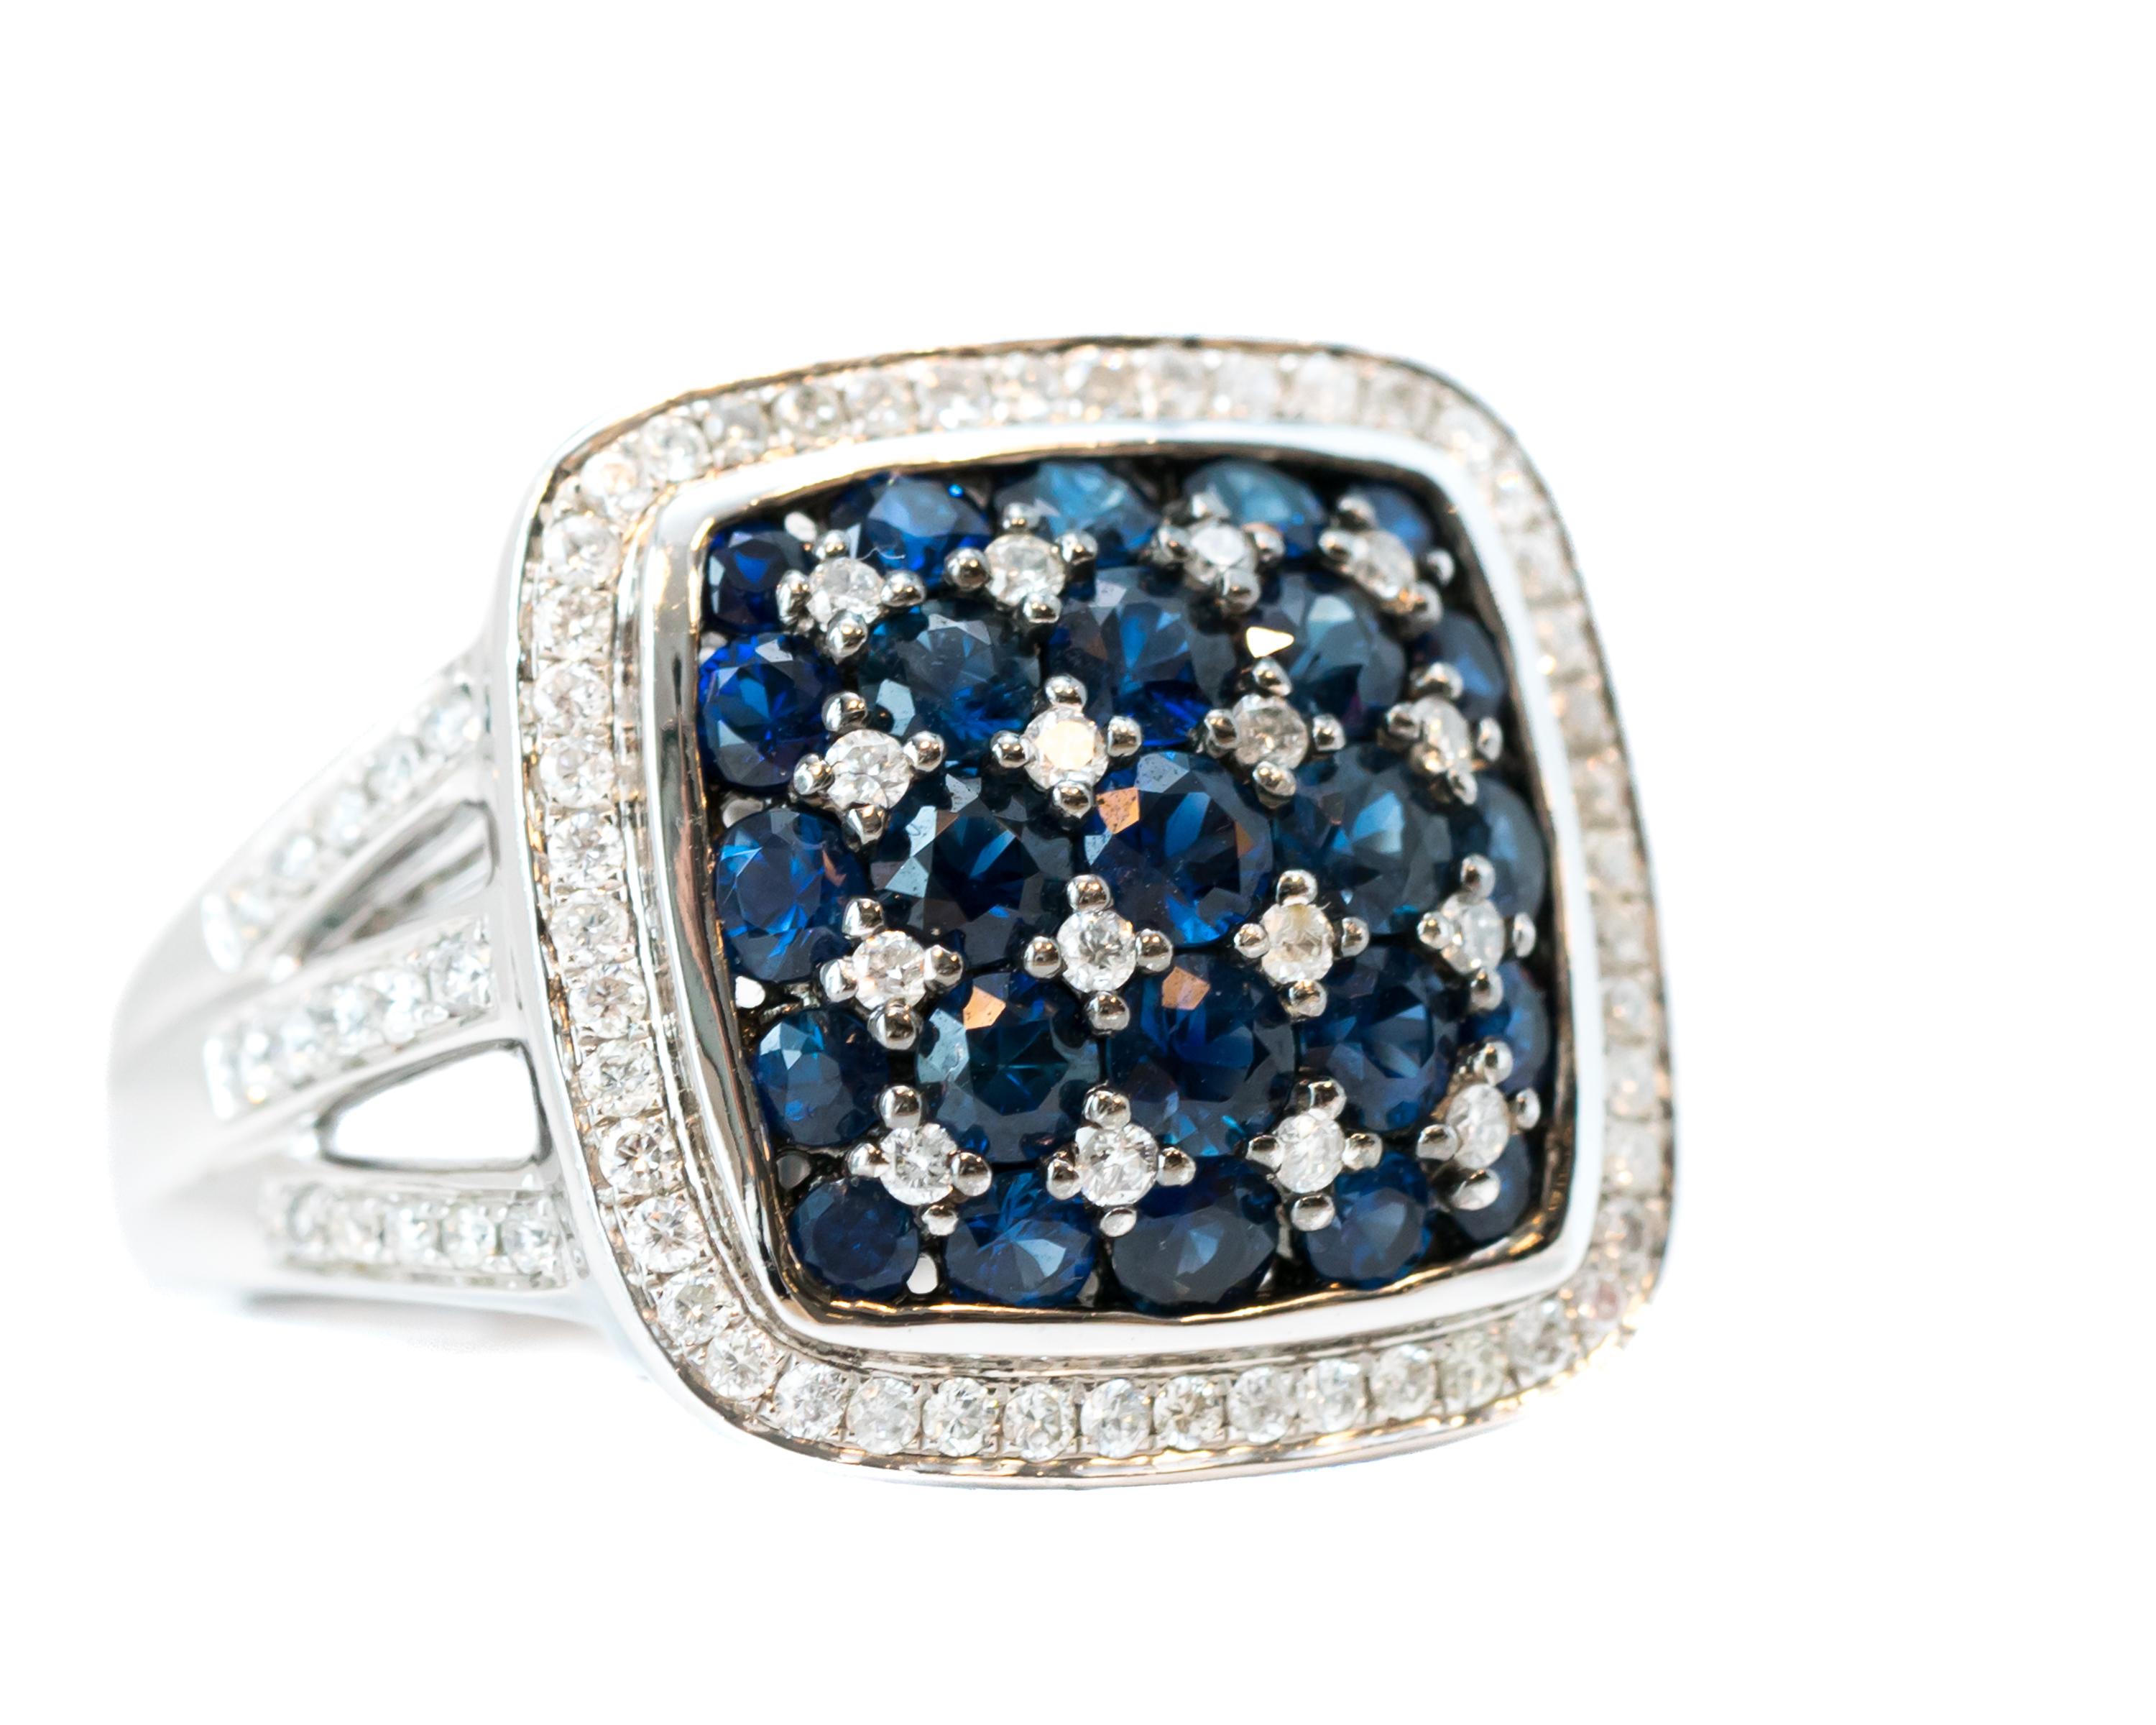 Features:
0.50 carat Round Brilliant Diamonds and 0.50 carat Round Blue Sapphires, all prong set
Crafted in 14 karat White Gold setting

Ring face measures 17 x 17.5 millimeters
Finger to top of stone measures 6.5 millimeters
Ring fits a size 6.75